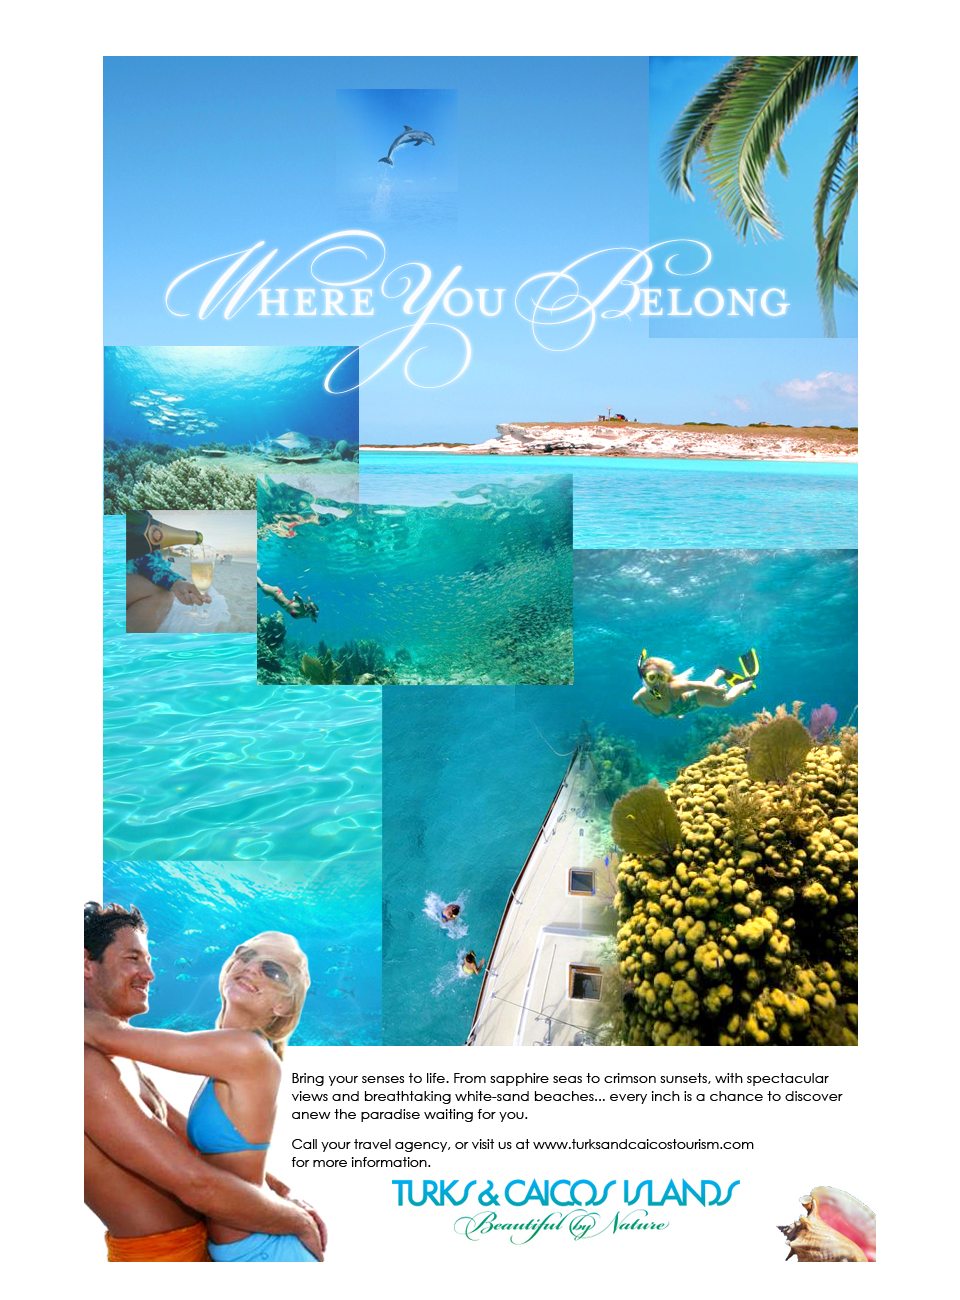 Turks & Caicos Islands - Picture Perfect Ad